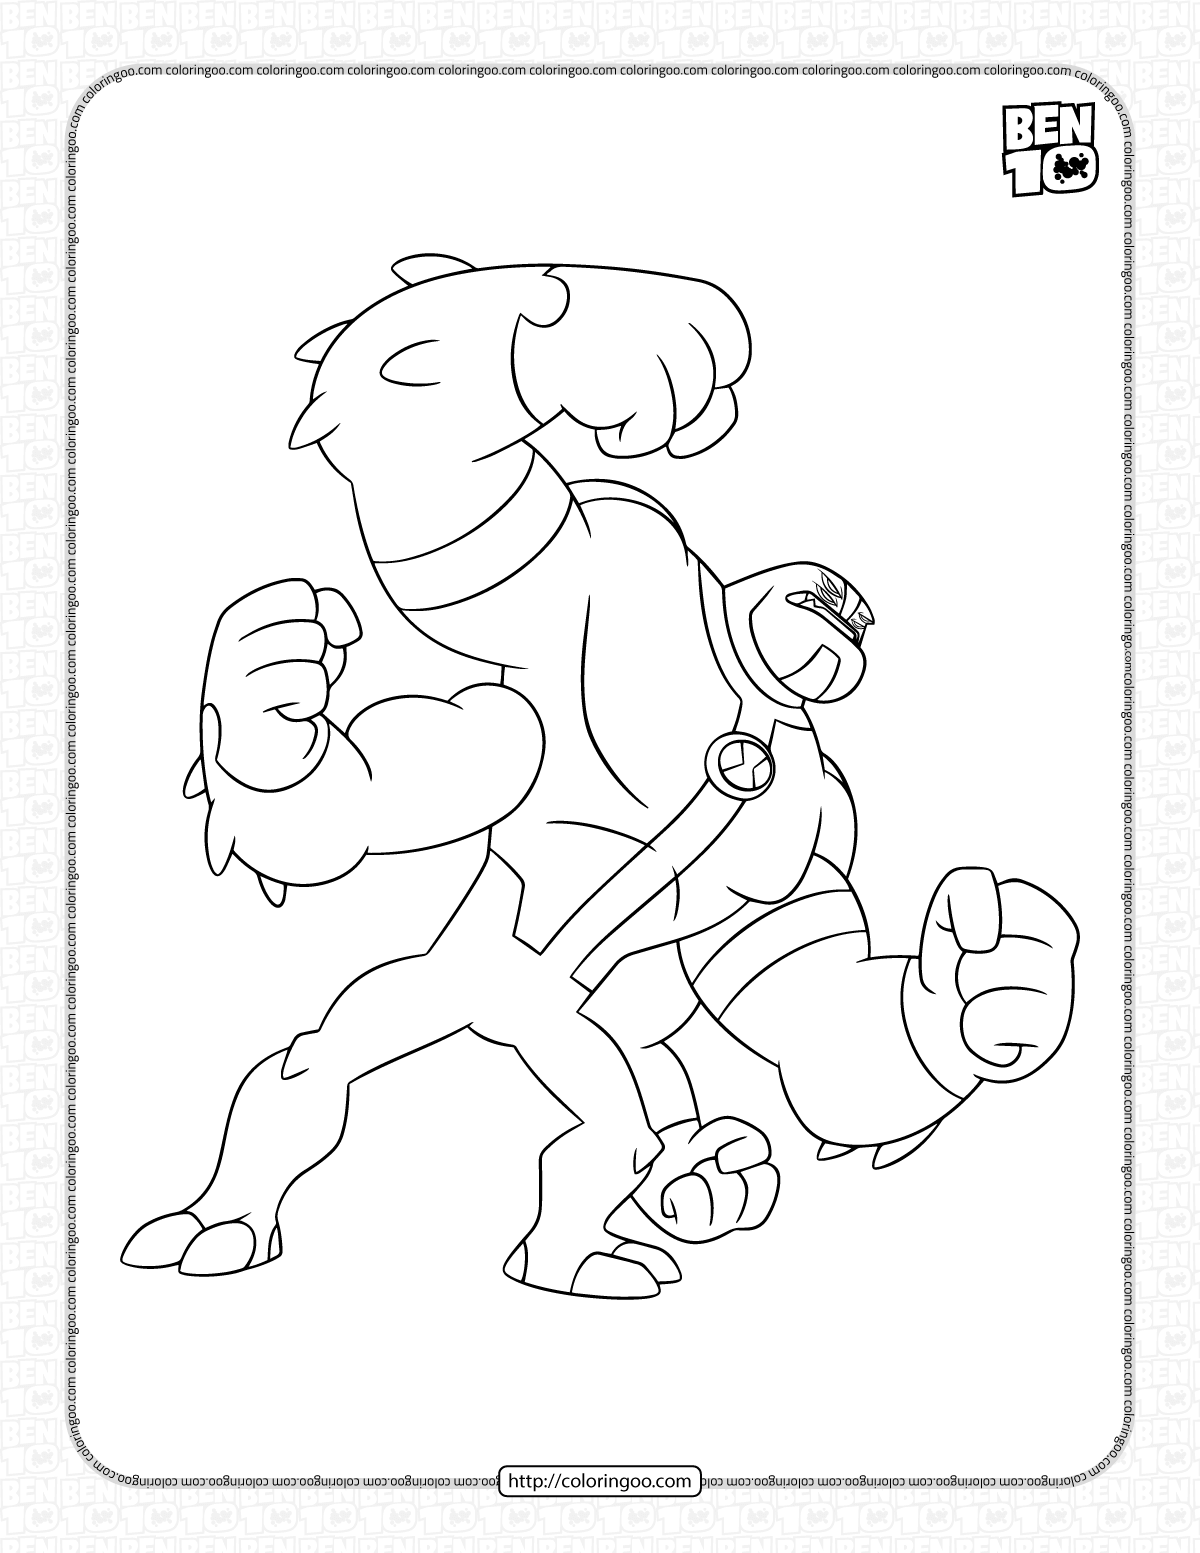 ben 10 four arms coloring page for kids